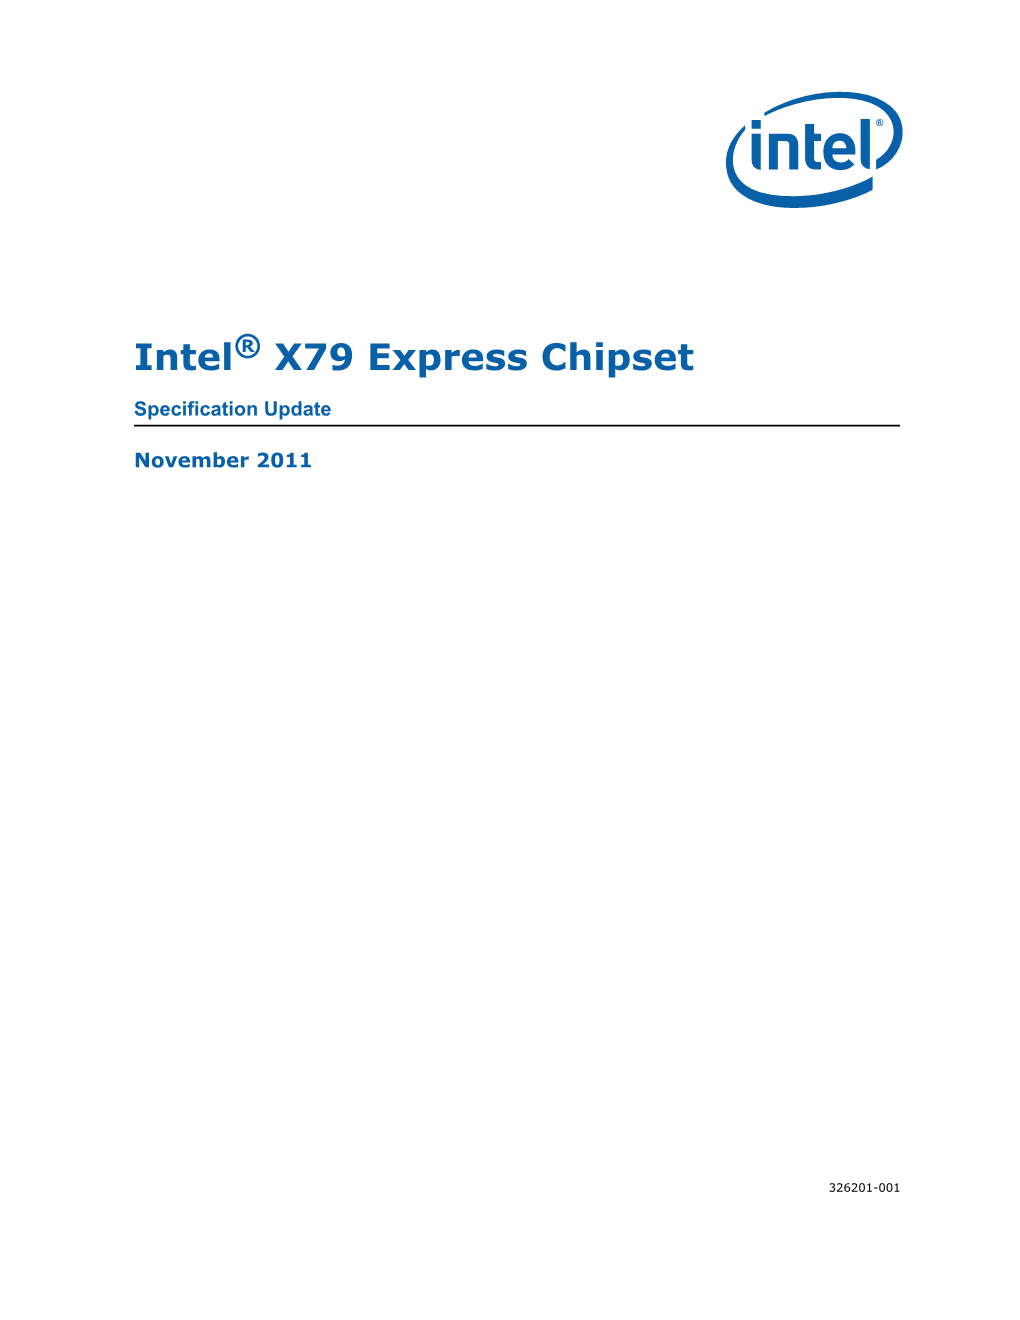 Intel® 6 Series Chipset and Intel® C200 Series Chipset